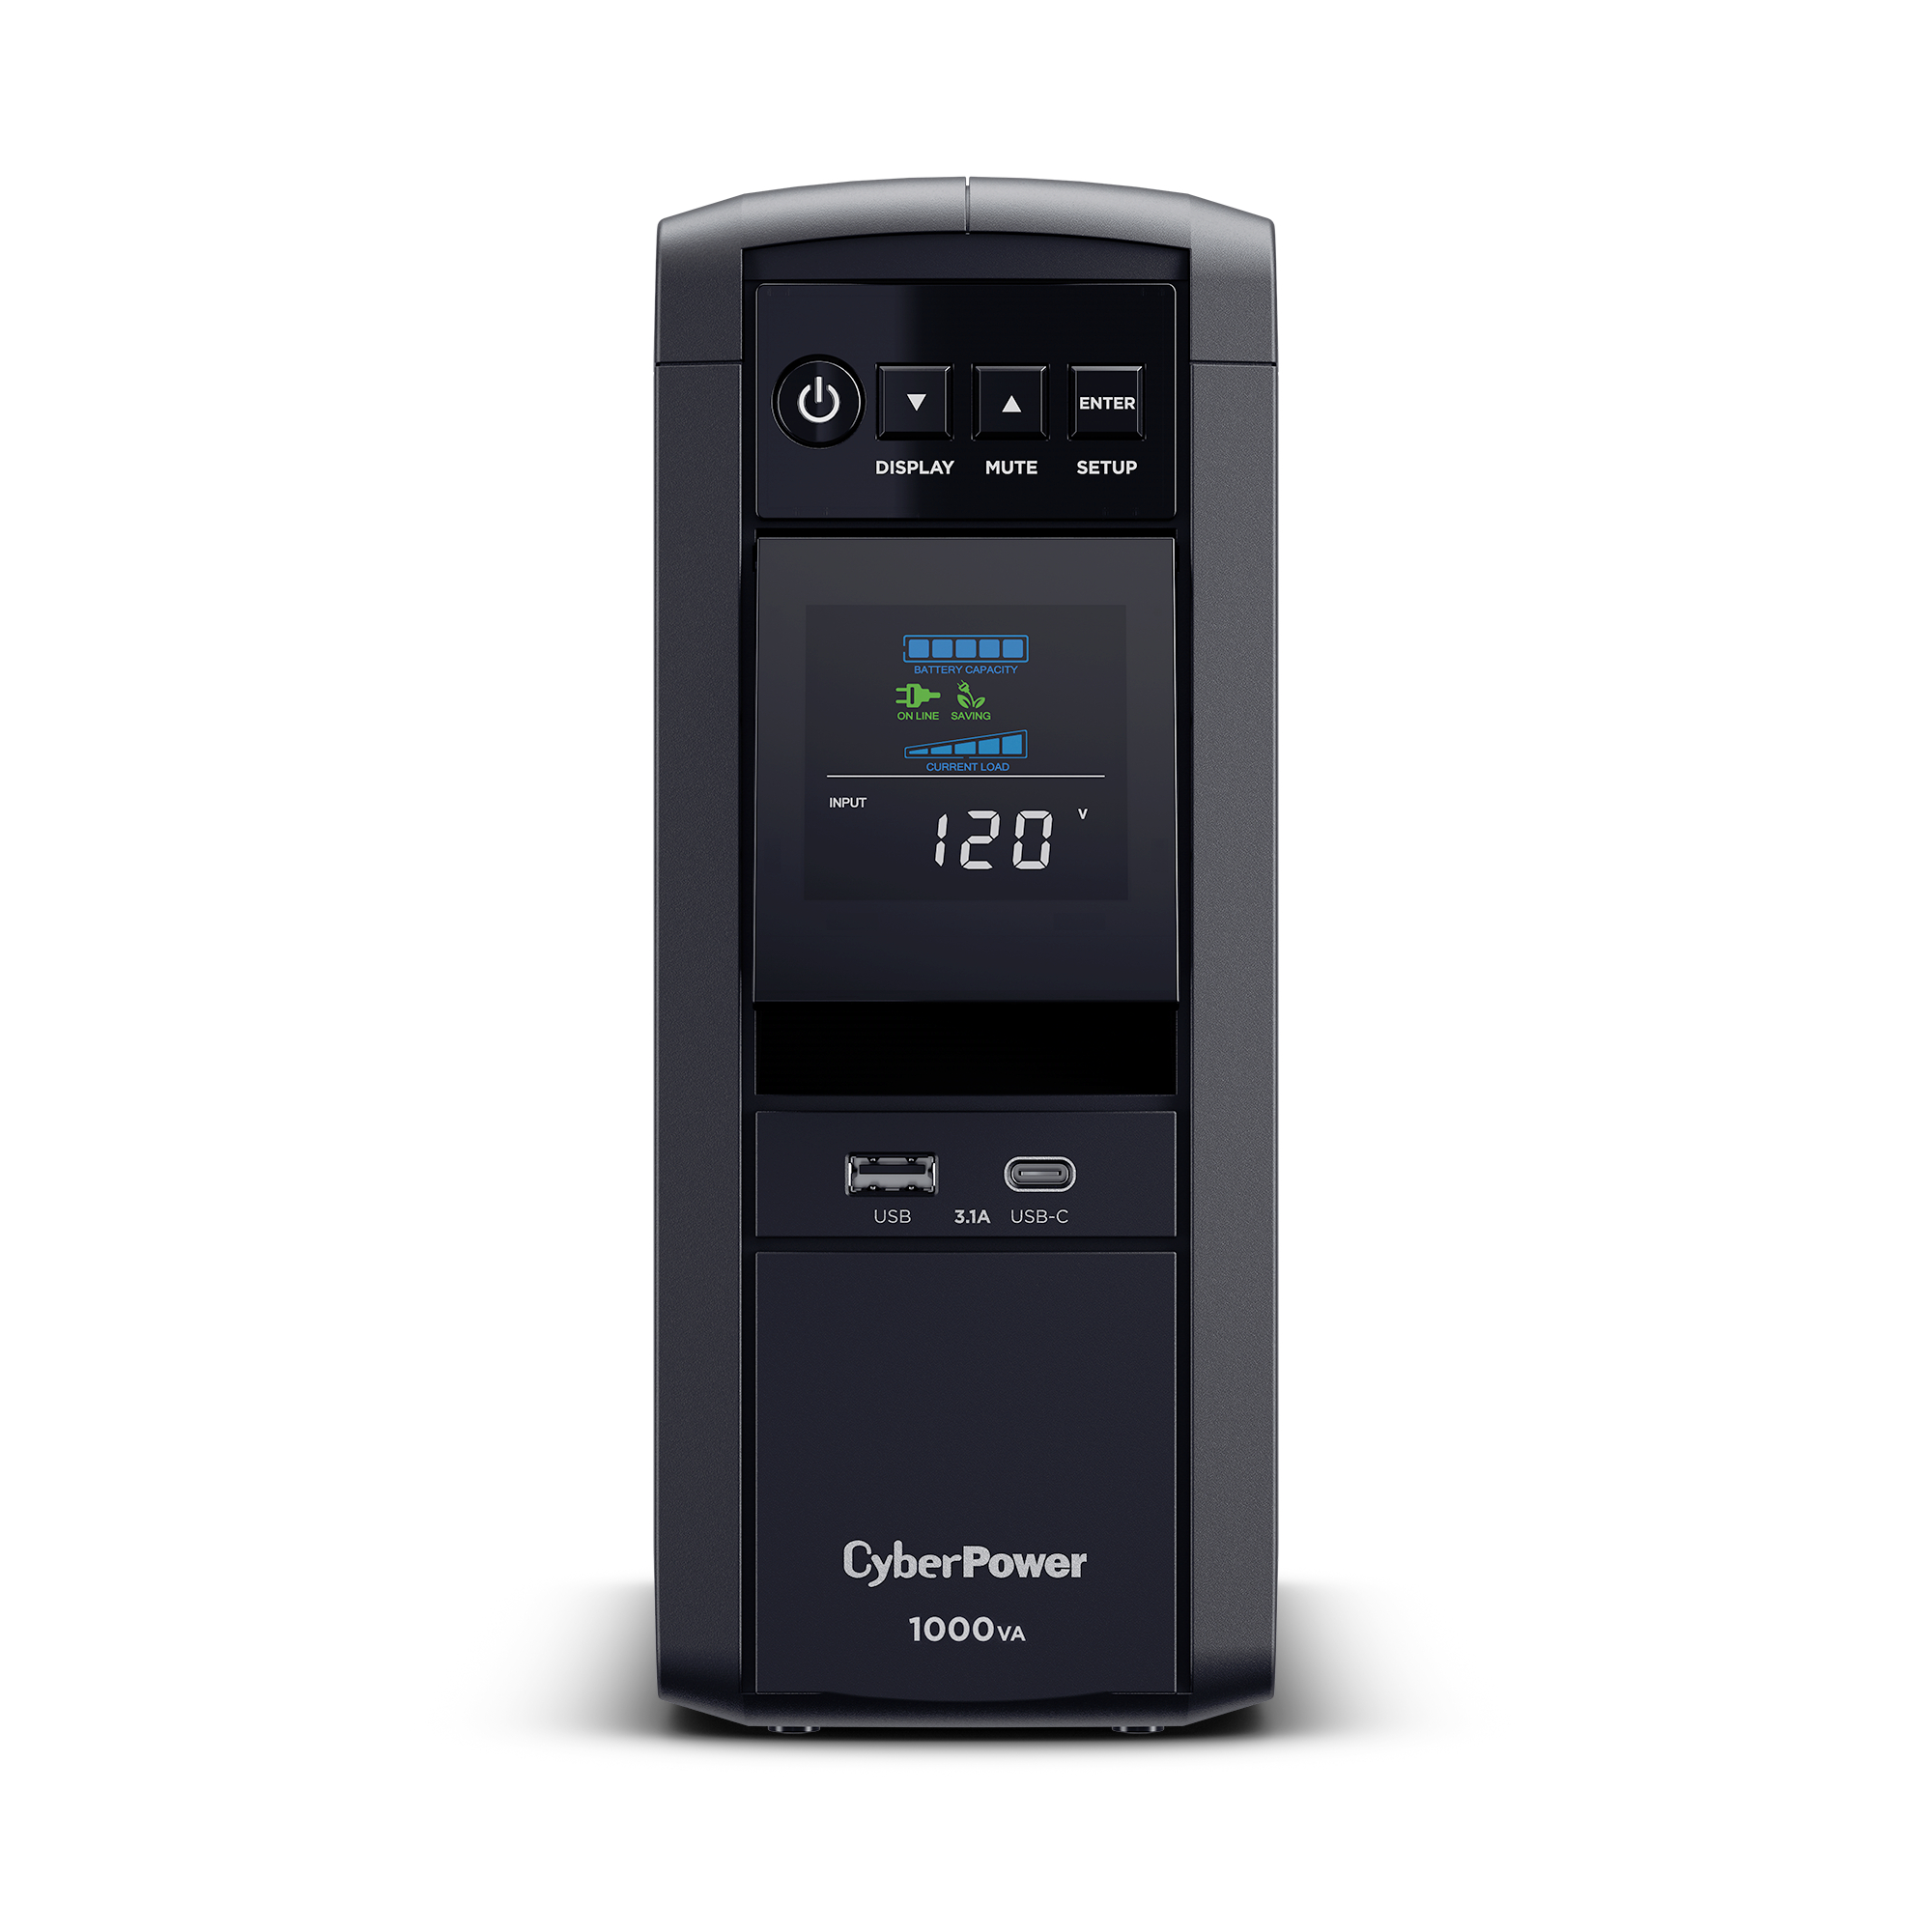 CP1000PFCLCD - PFC Sinewave UPS Series - Product Details, Specs, Downloads